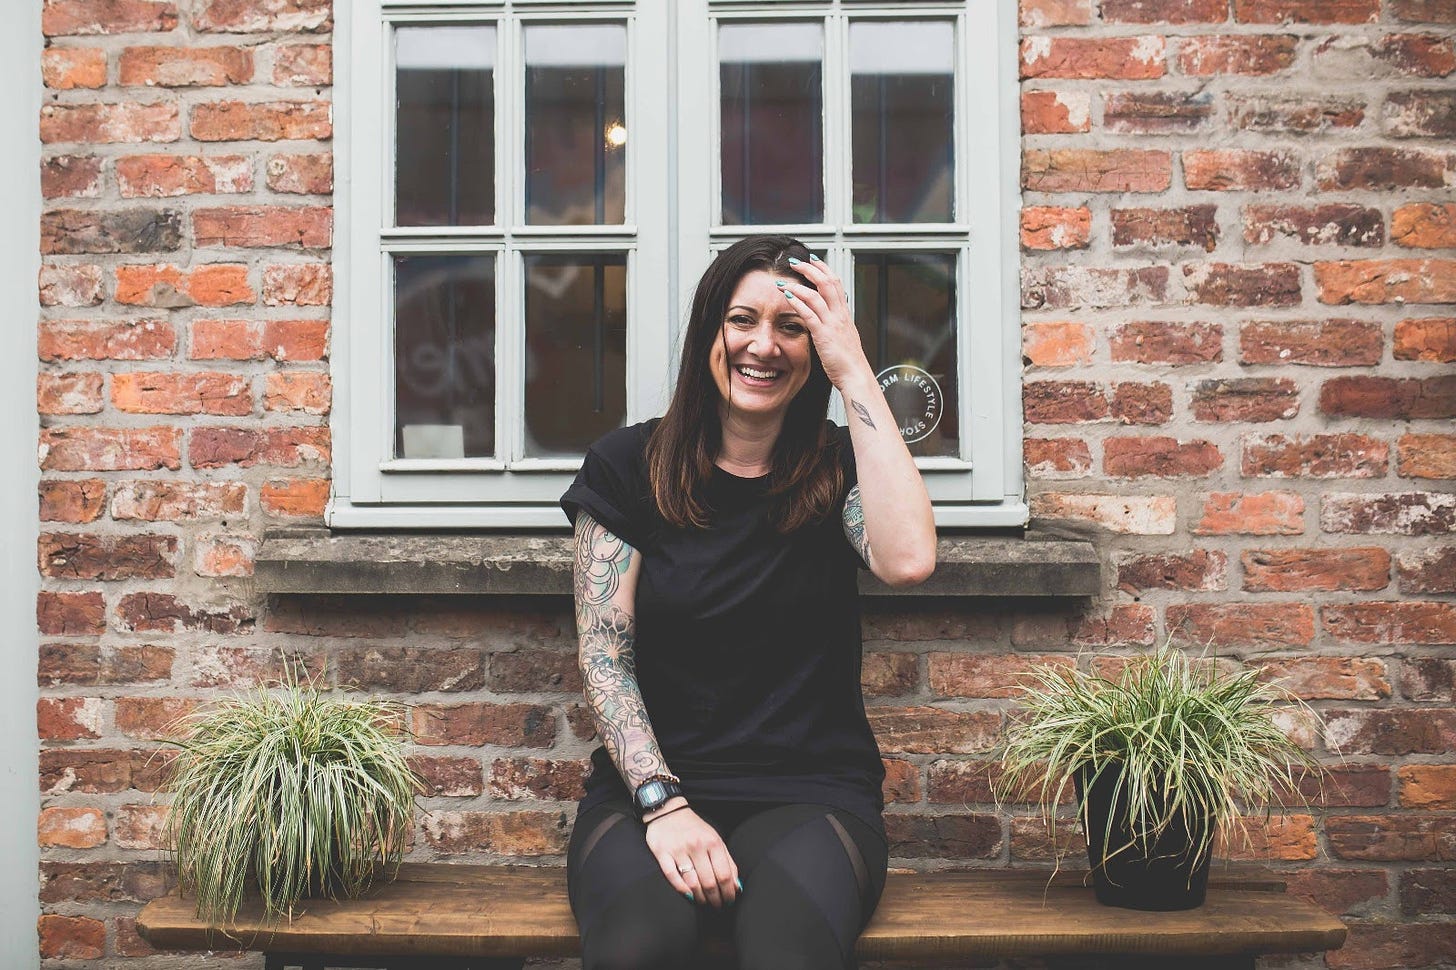 White woman in her 30s in a black T-shirt and jeans sits on a bench outside a redbrick house, under a window. Two plants sit either side. She's laughing and adjusting her hair with one hand.